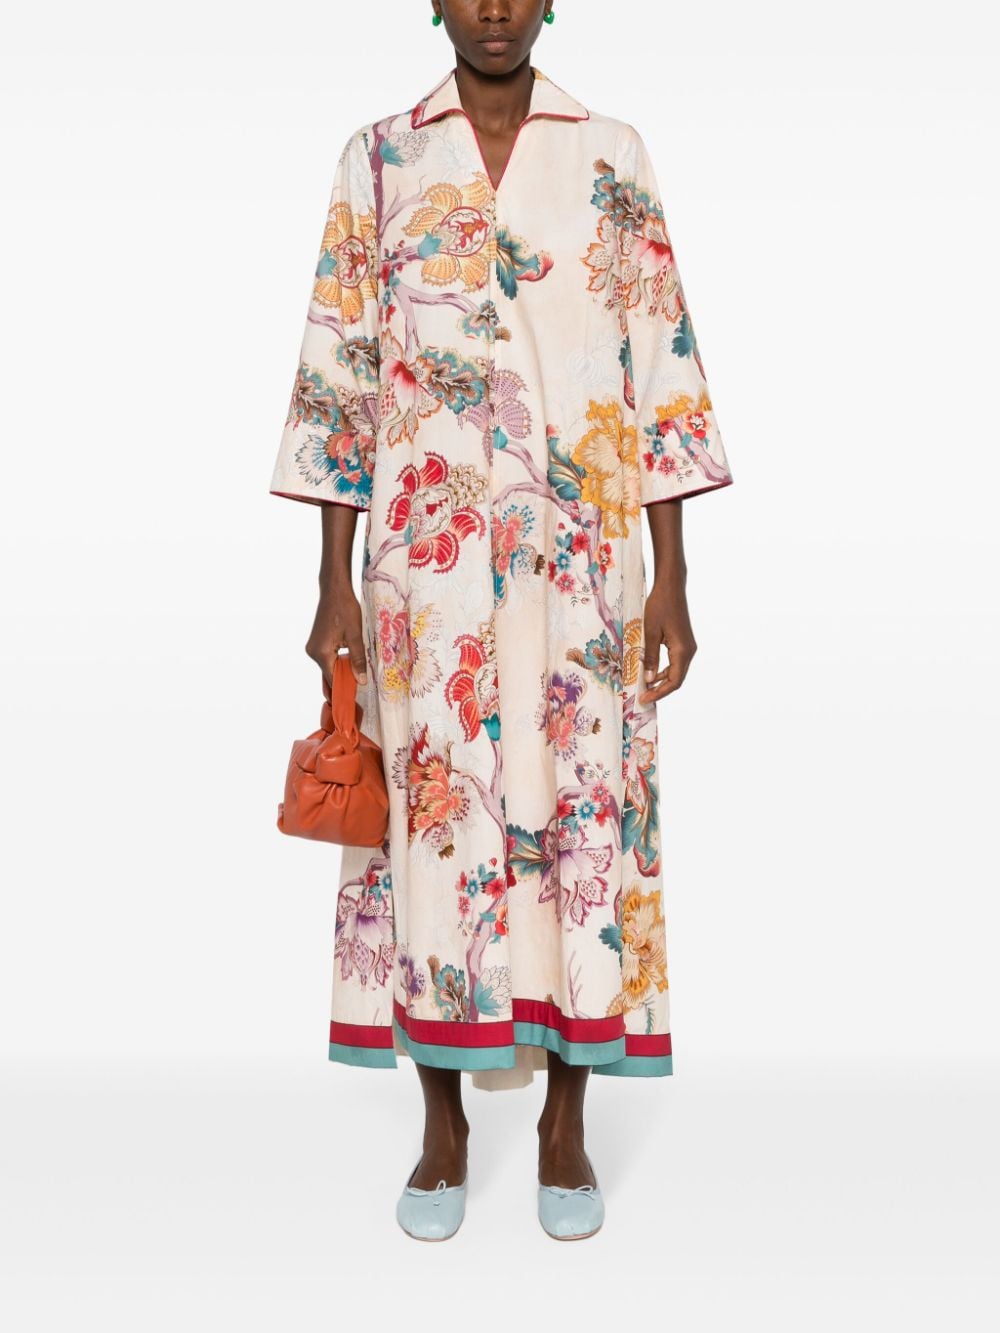 F.R.S For Restless Sleepers floral-print maxi dress - Beige